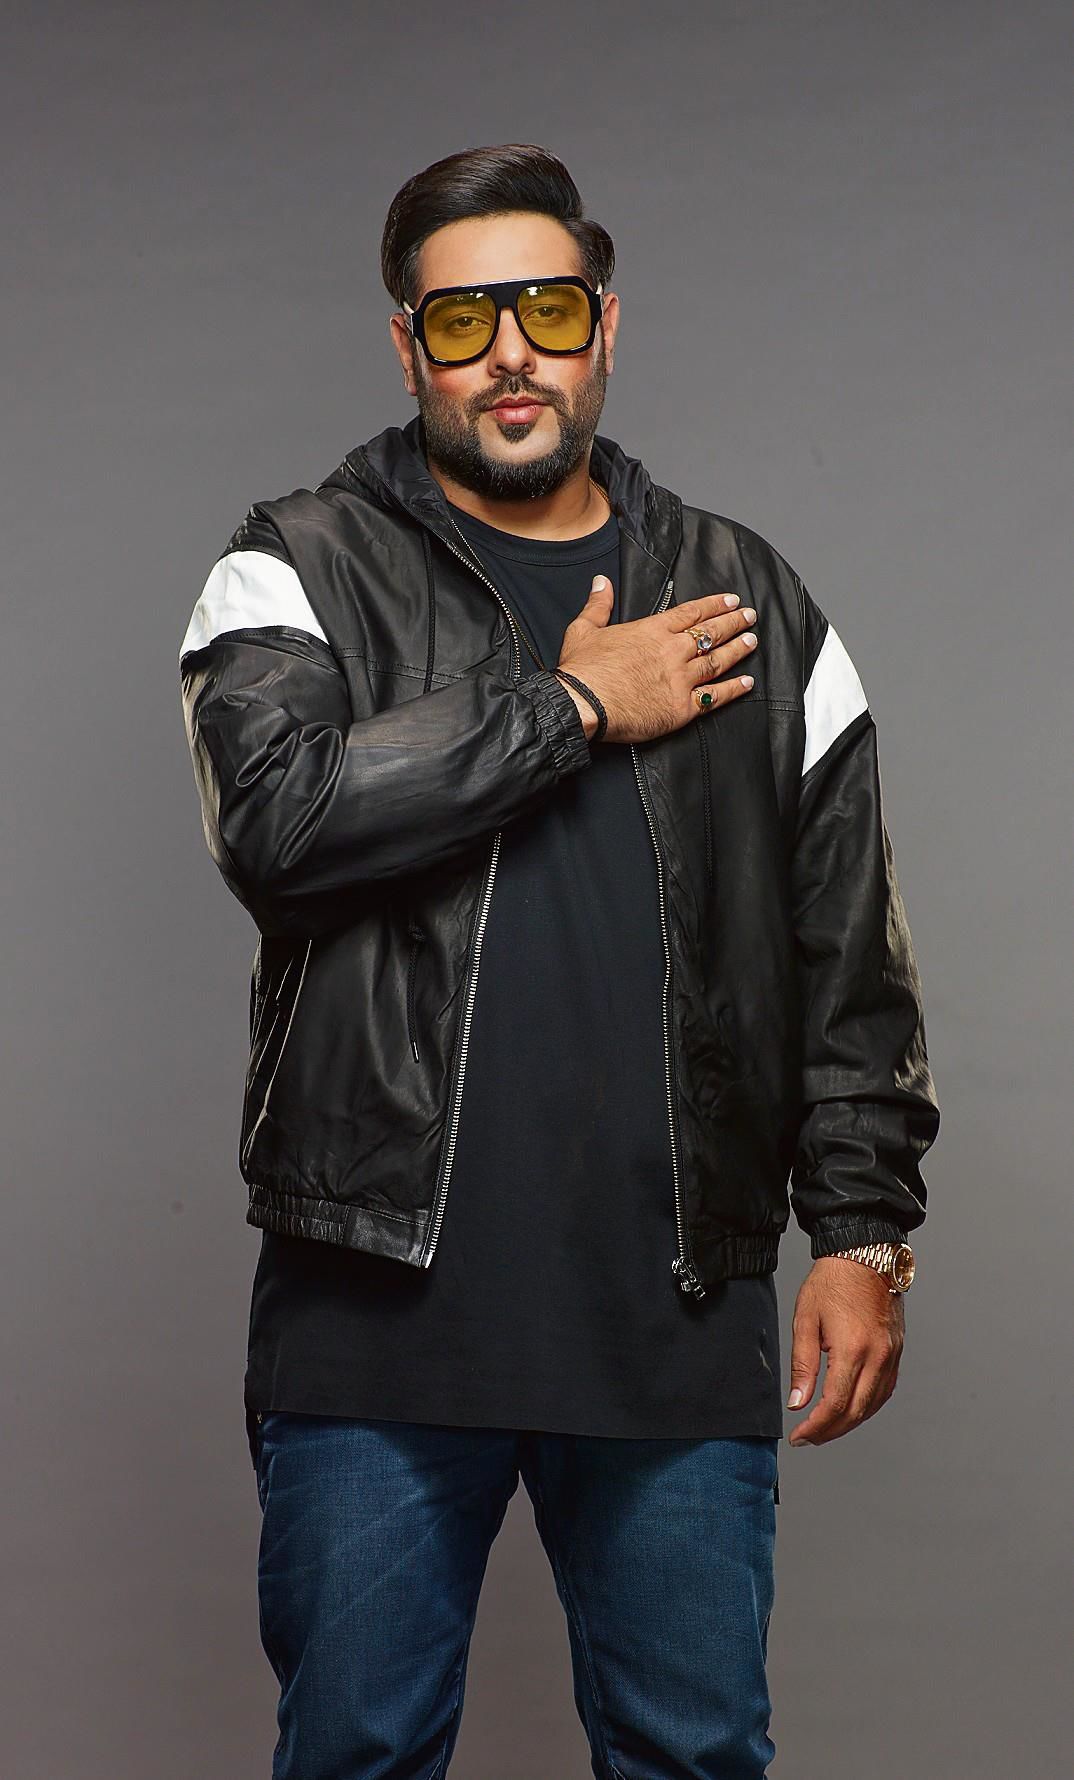 Singer and rapper Badshah to perform at Untold in Dubai